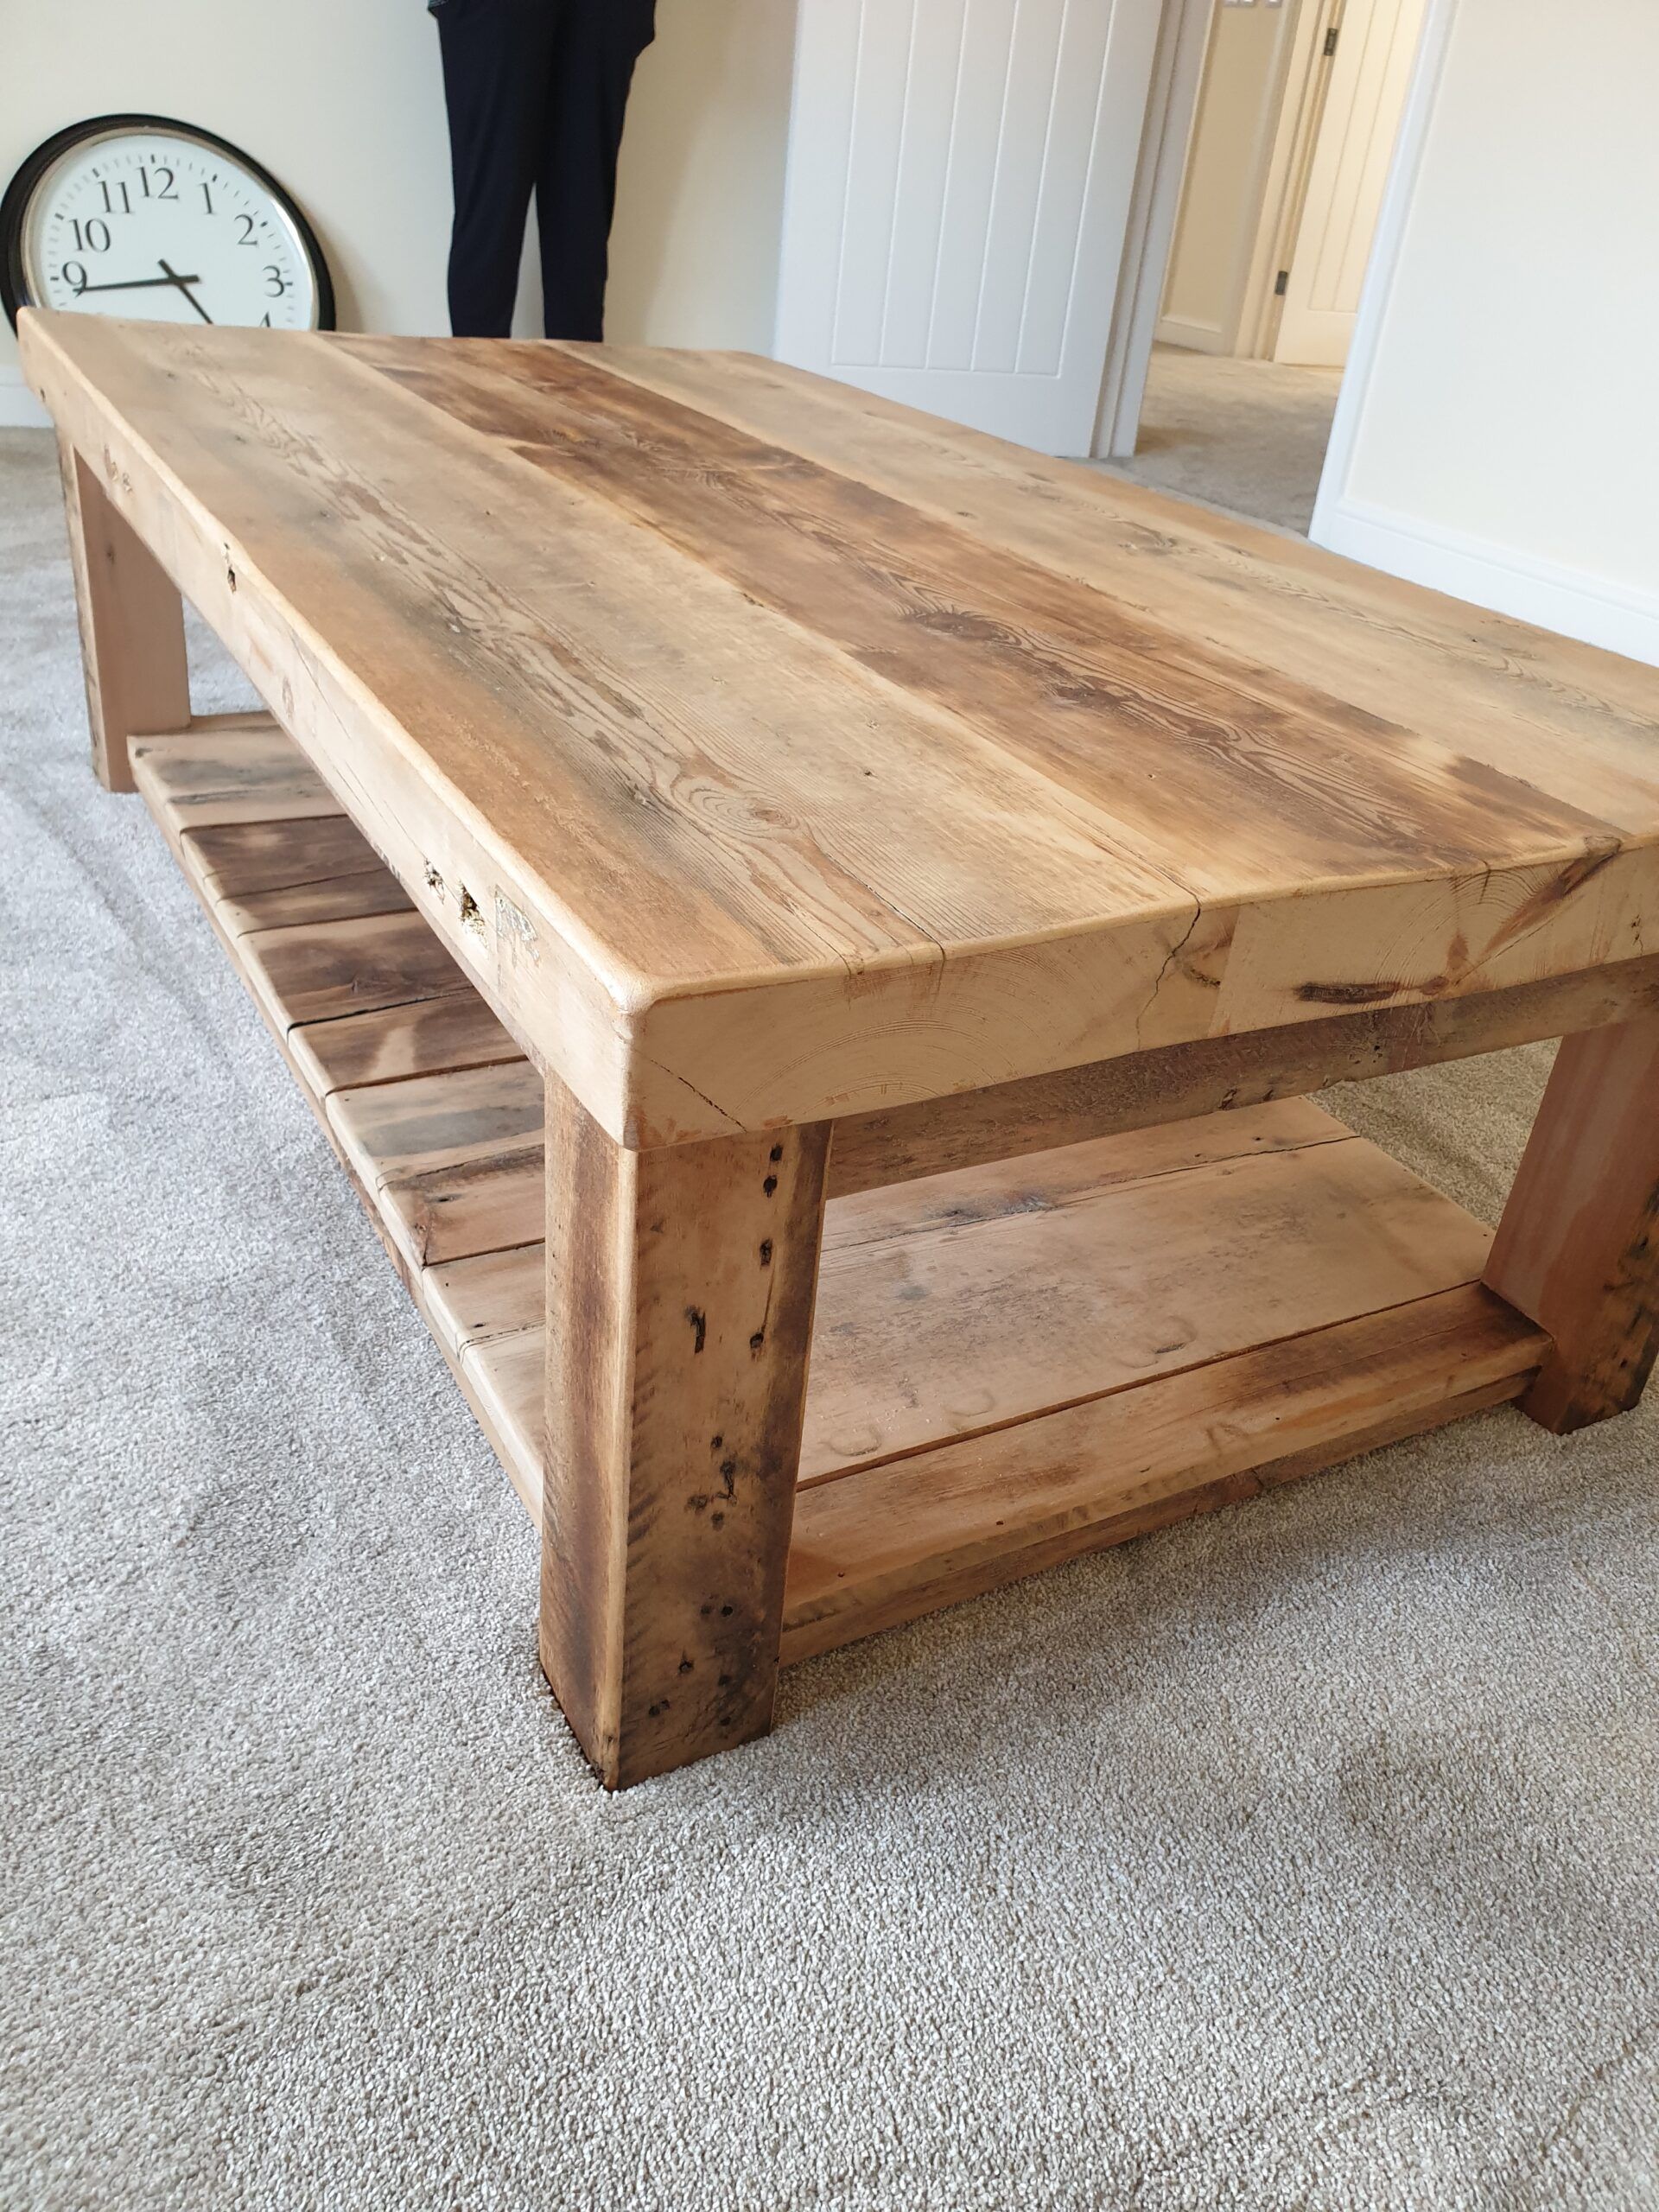 Buy Rustic Wood Coffee Table Made From Reclaimed Timber Throughout Rustic Coffee Tables (Gallery 7 of 20)